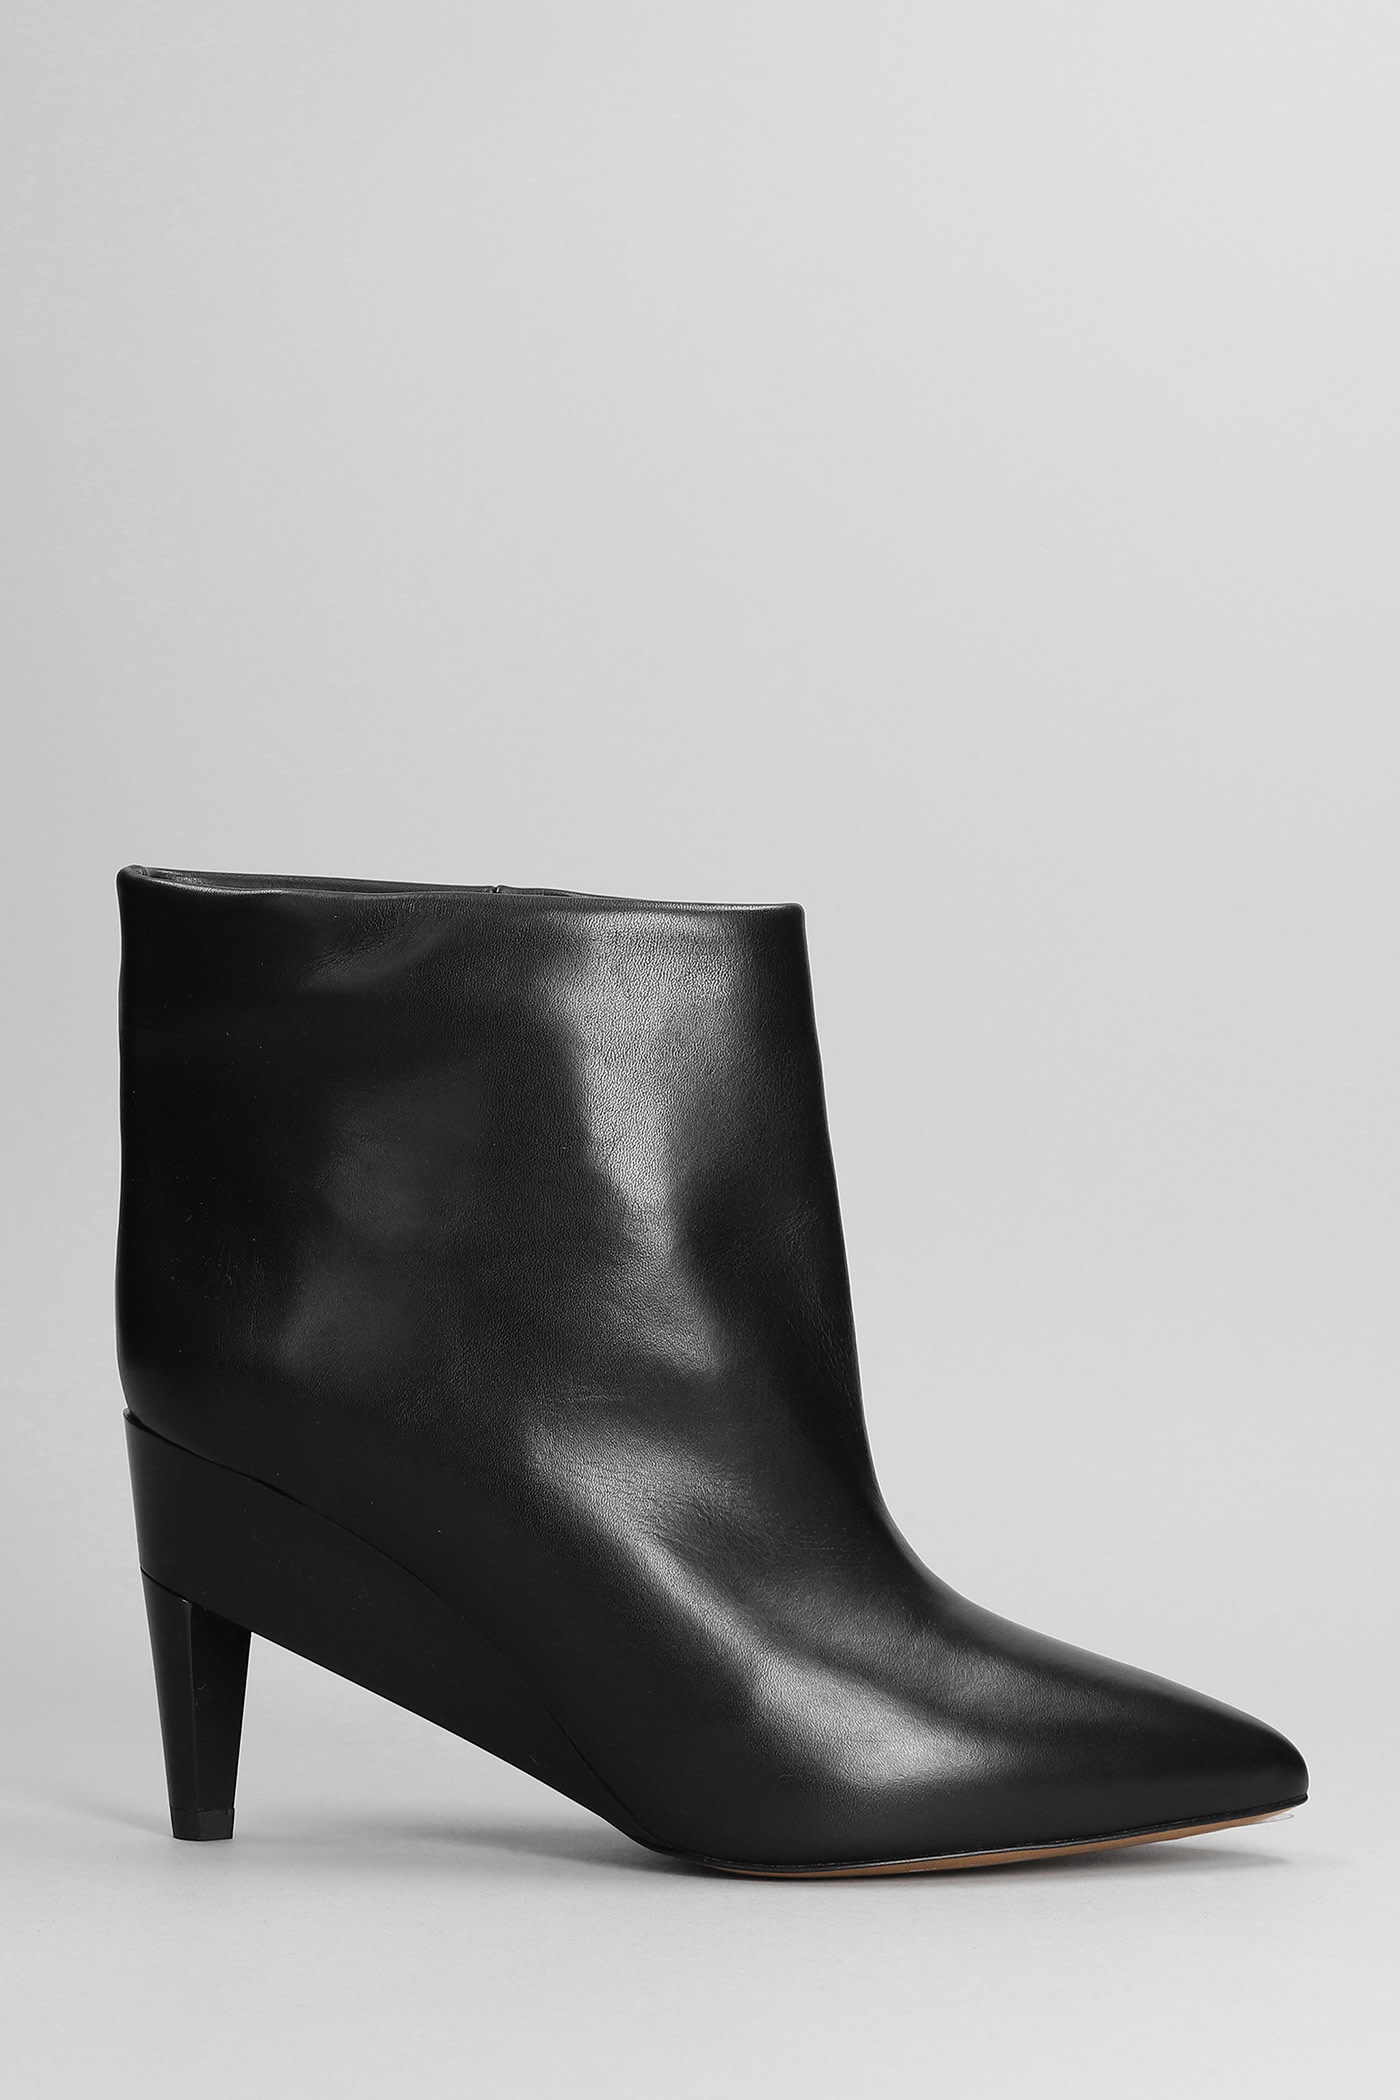 ISABEL MARANT DYLVEE HIGH HEELS ANKLE BOOTS IN BLACK LEATHER